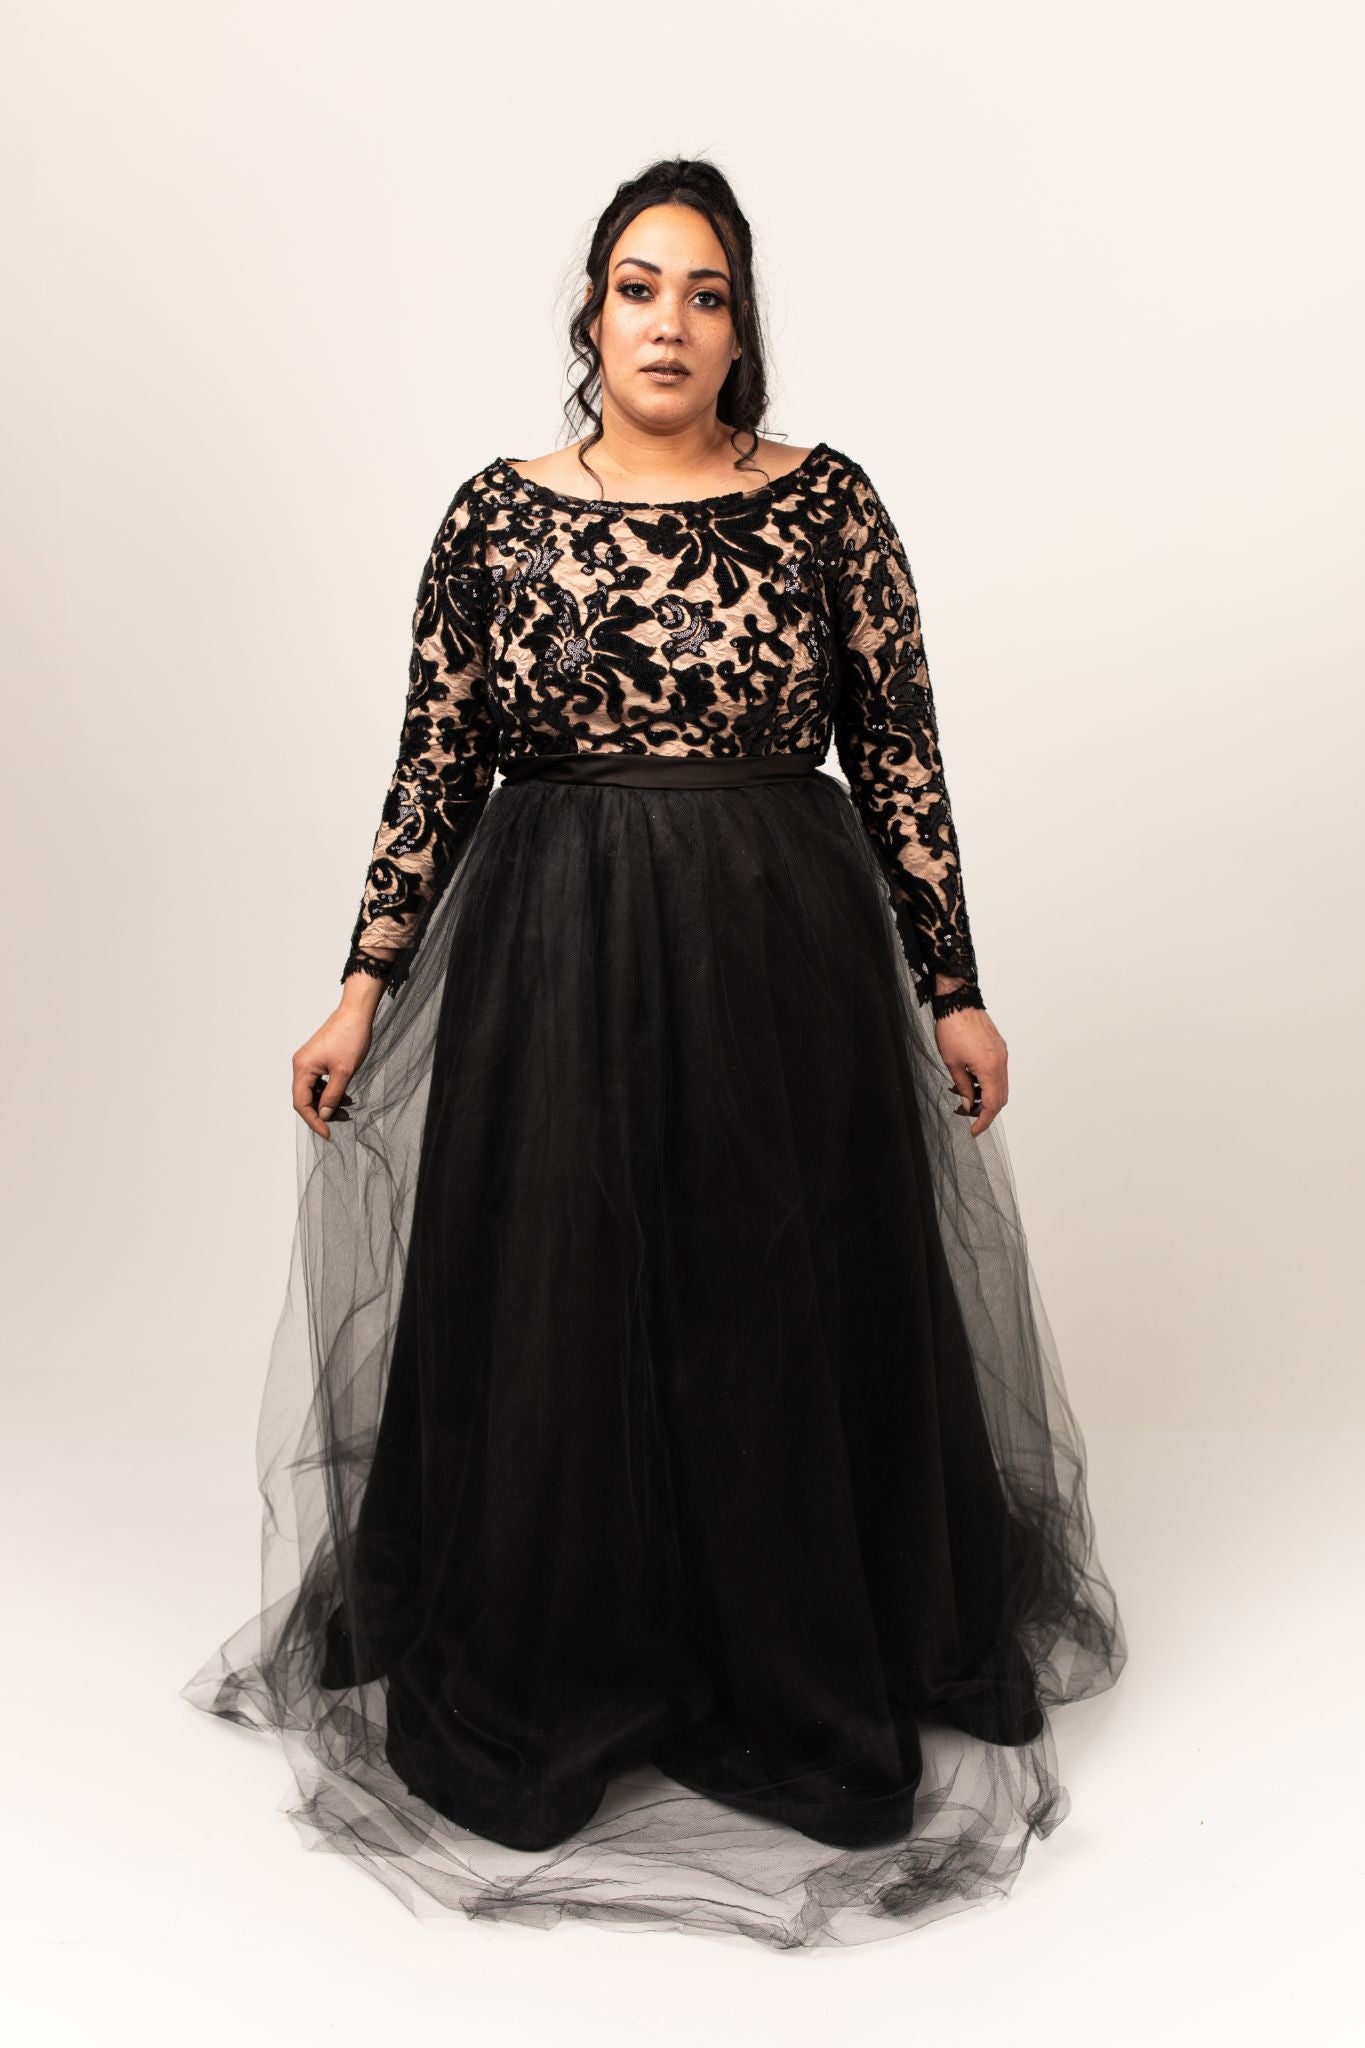 Noir Gown with Tulle Skirt